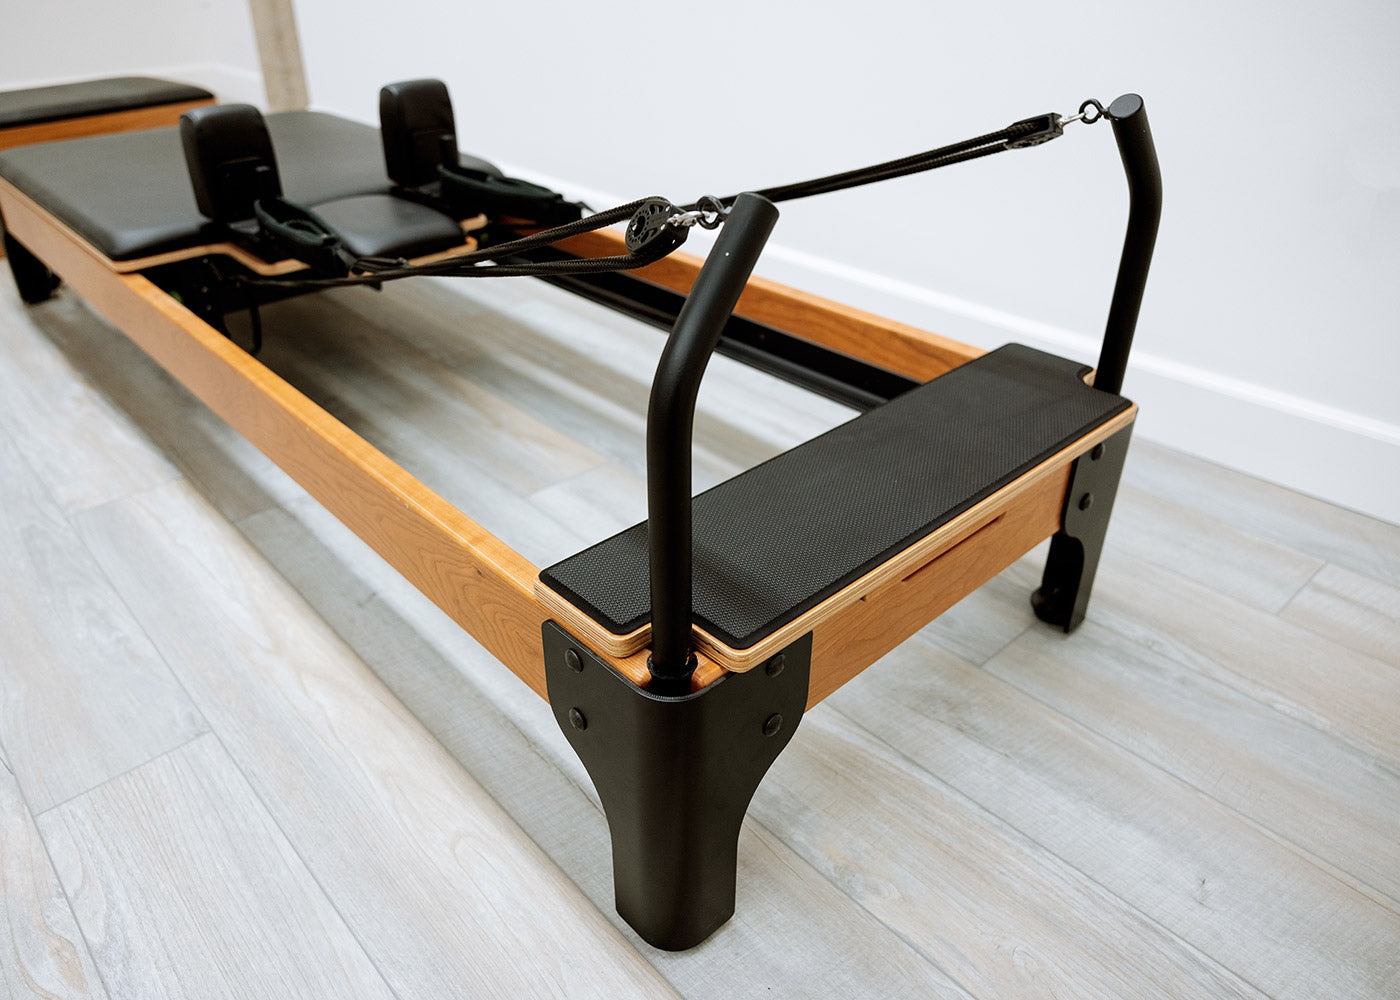 Flexia's smart at-home Pilates reformer features real-time